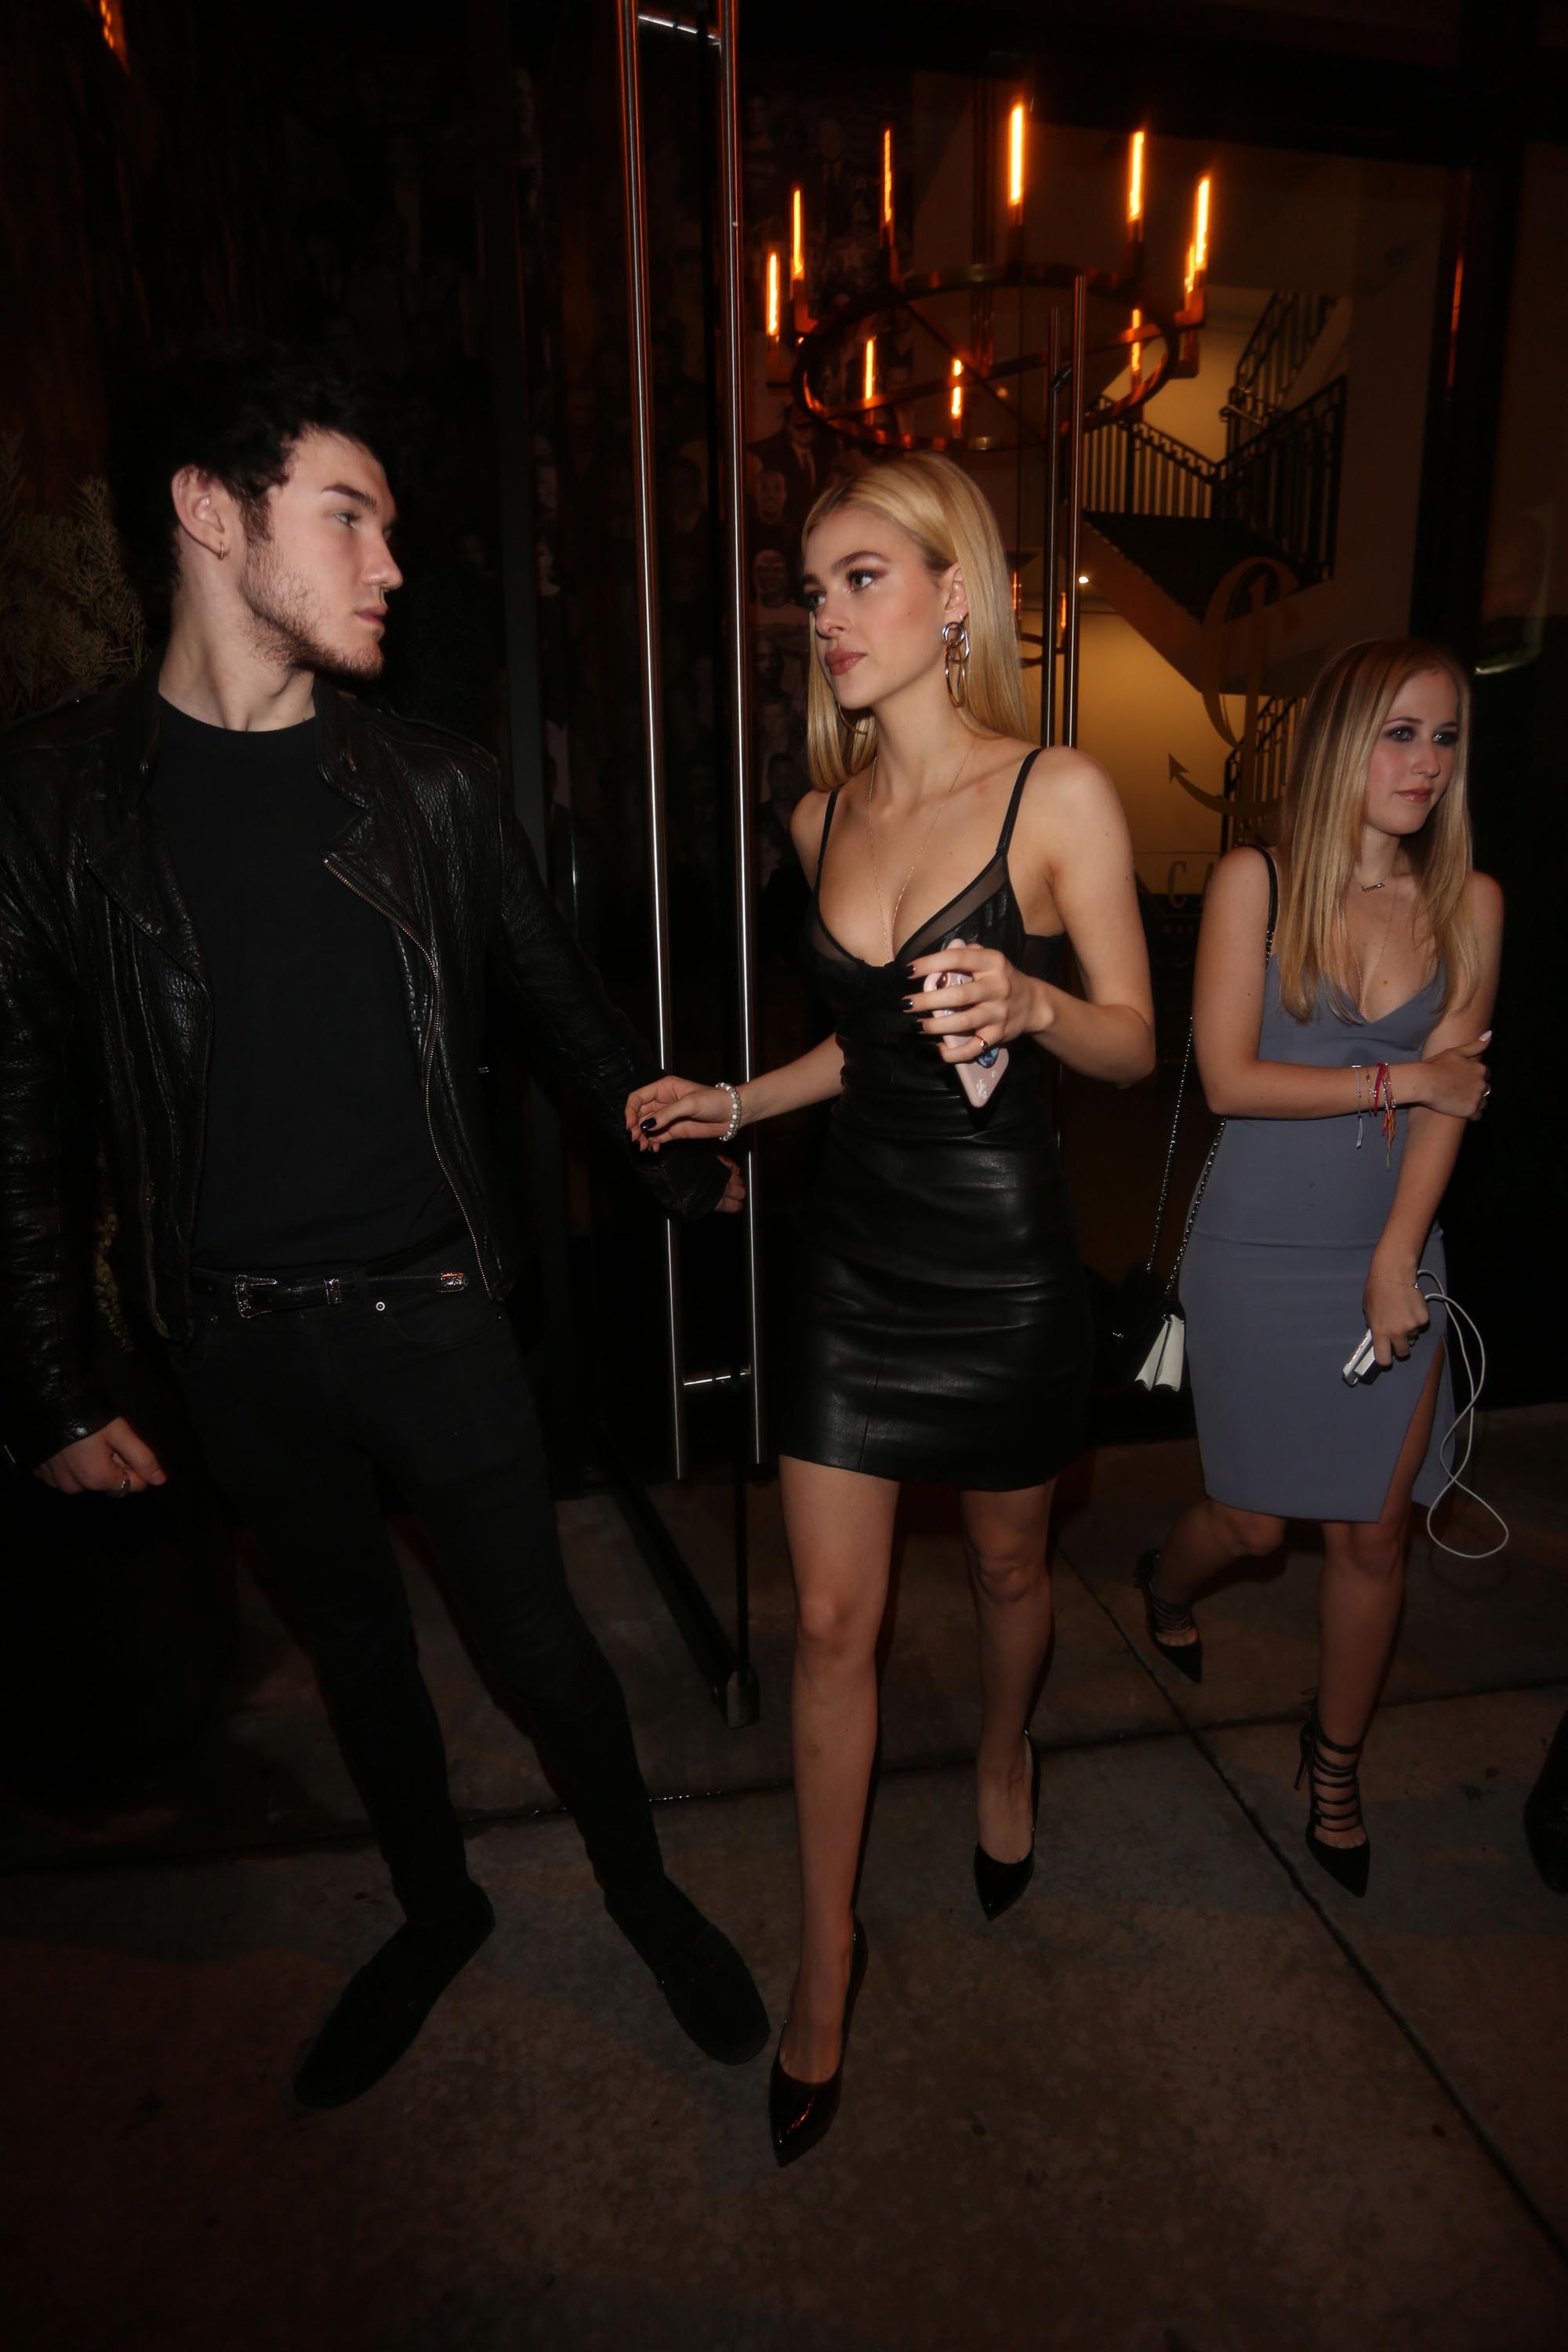 Nicola Peltz enjoyed a night out with friends at Catch LA